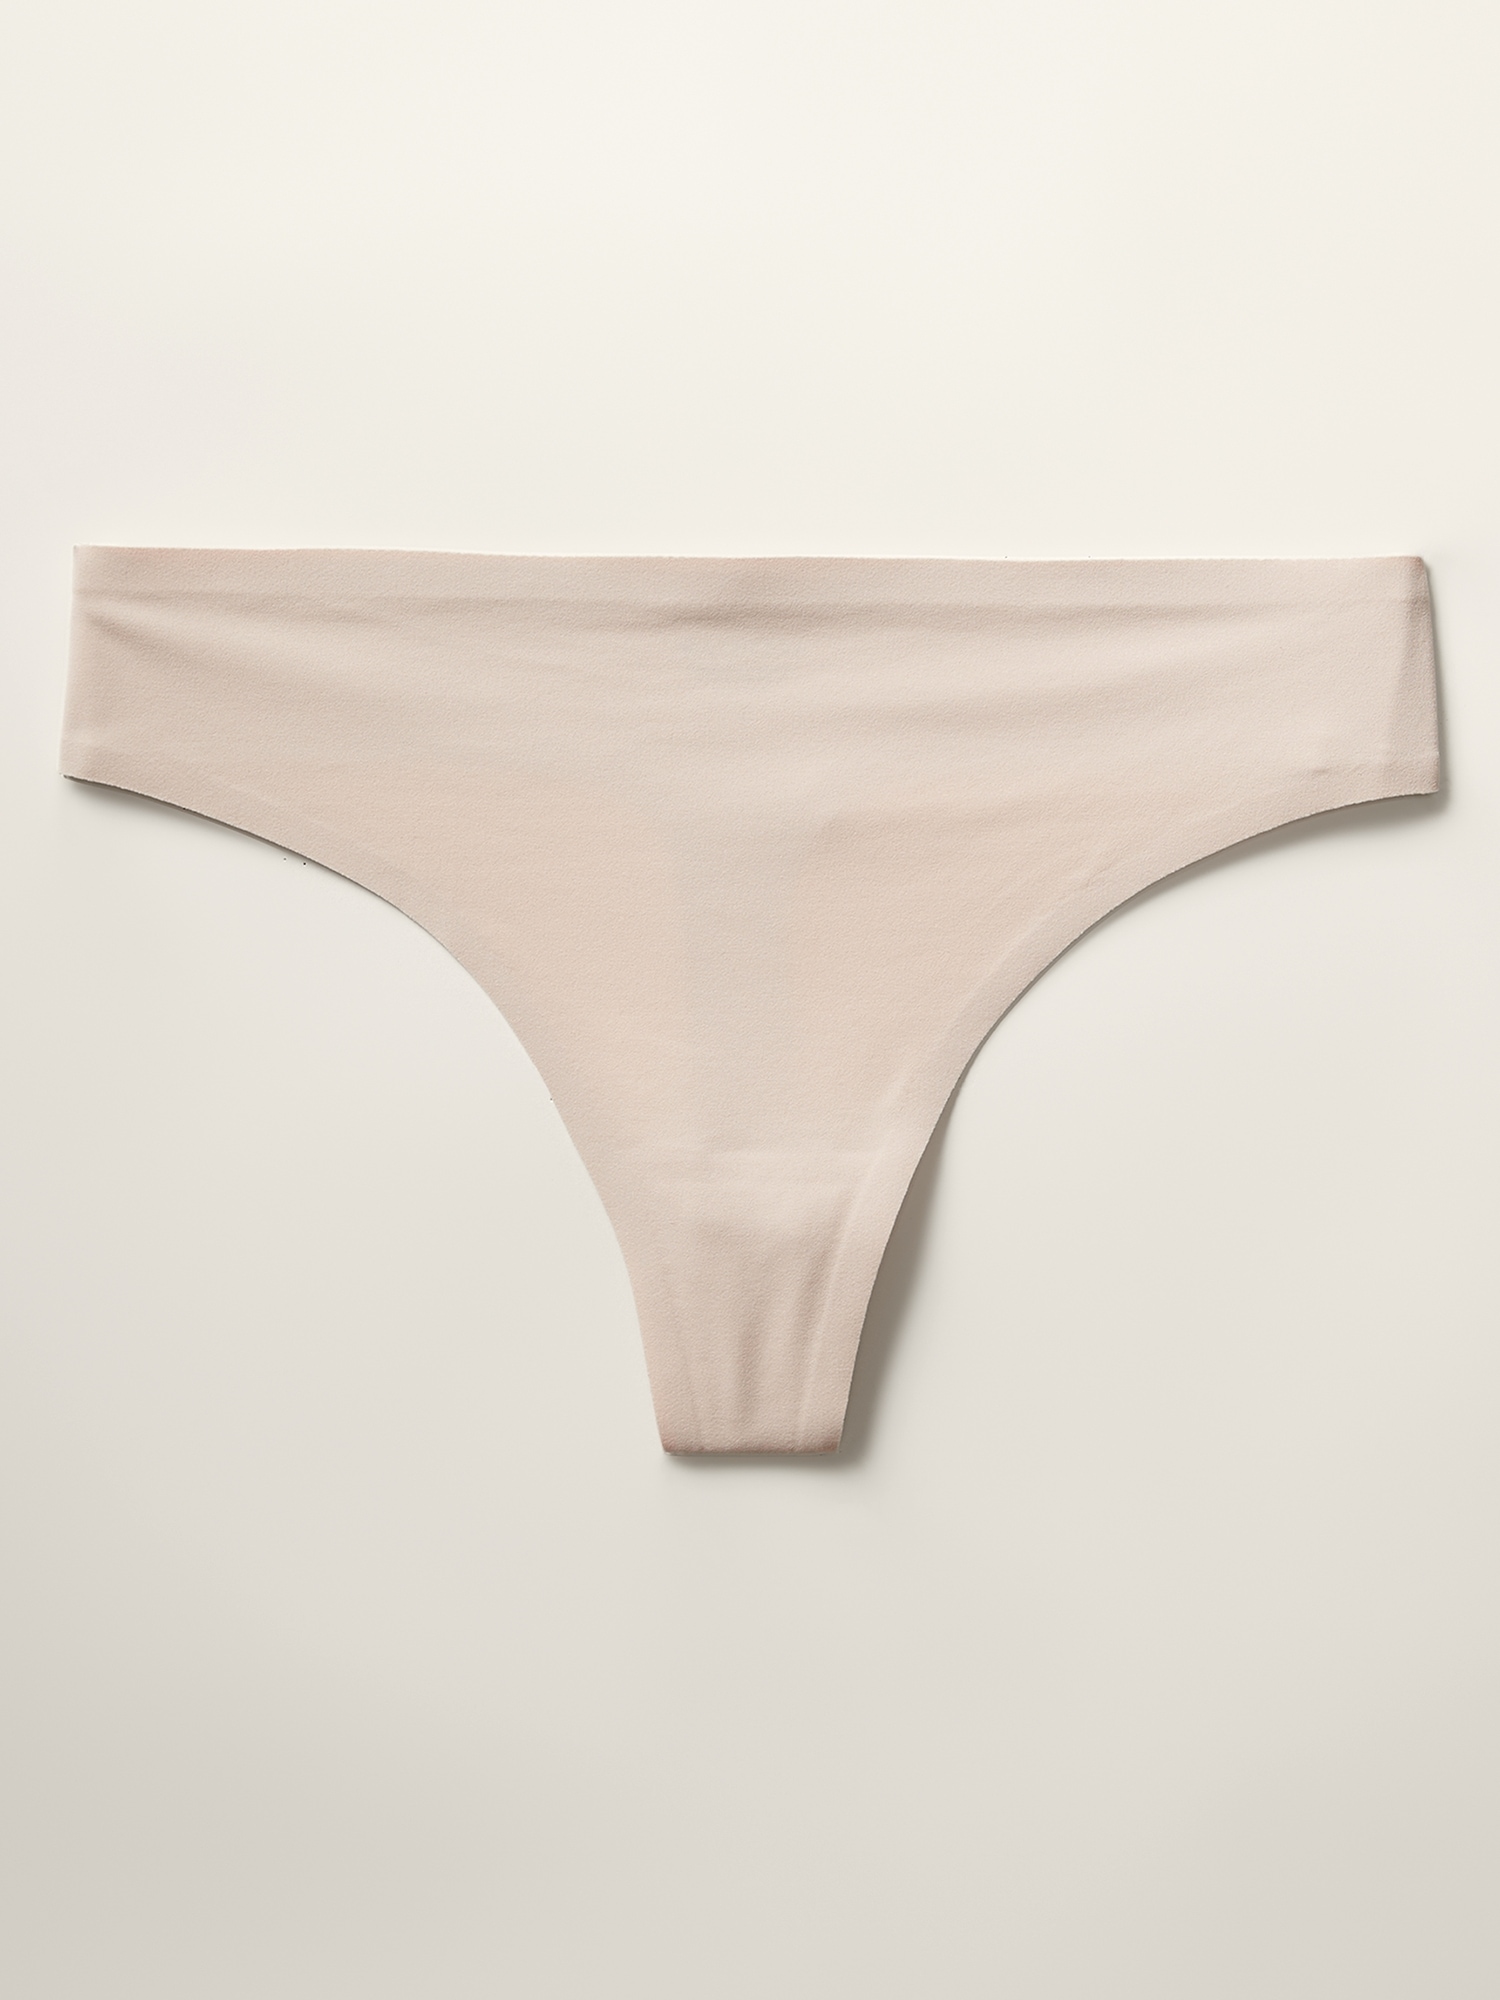 Aerie - NEW undies online + TWO extra days to get them ALL 10 for